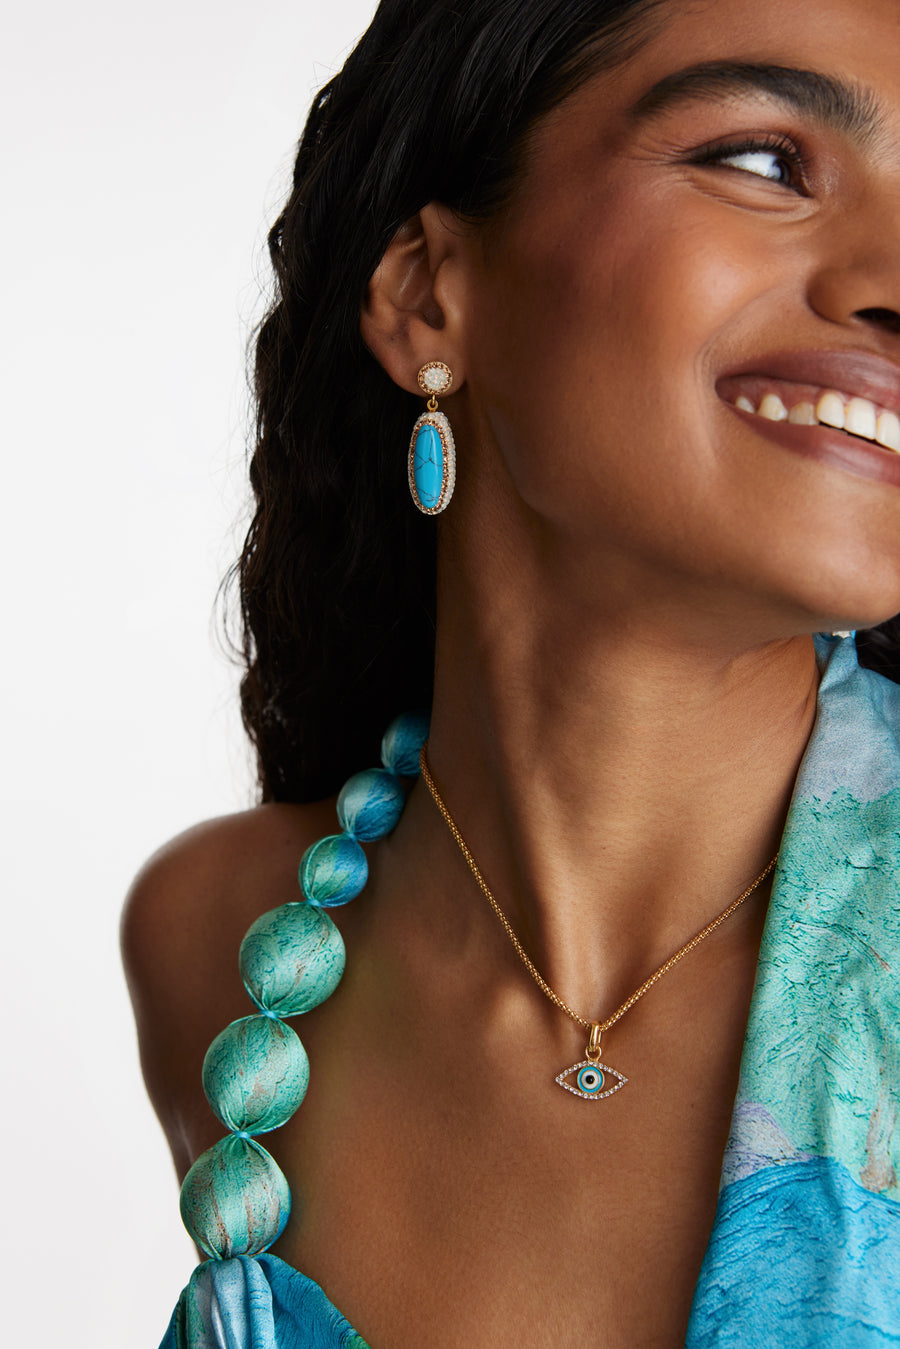 model shot wearing the crystal evil eye charm on a chain and also wearing turquoise drop earrings while smiling